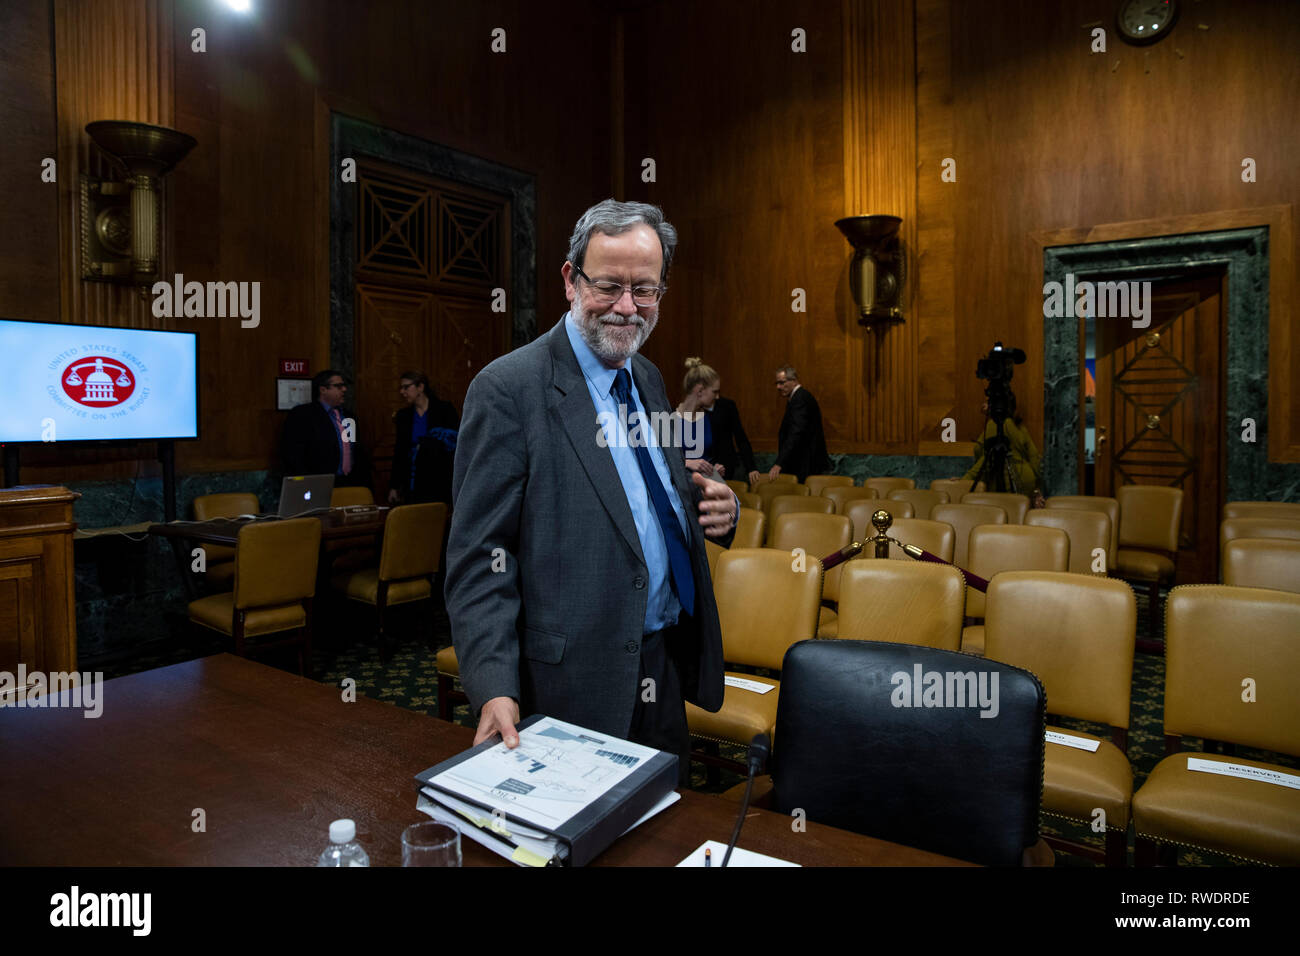 Congressional Budget Office Director Keith Hall arrives before testifying before the Senate Budget Committee on Capitol Hill in Washington, DC on January 29, 2019. Stock Photo